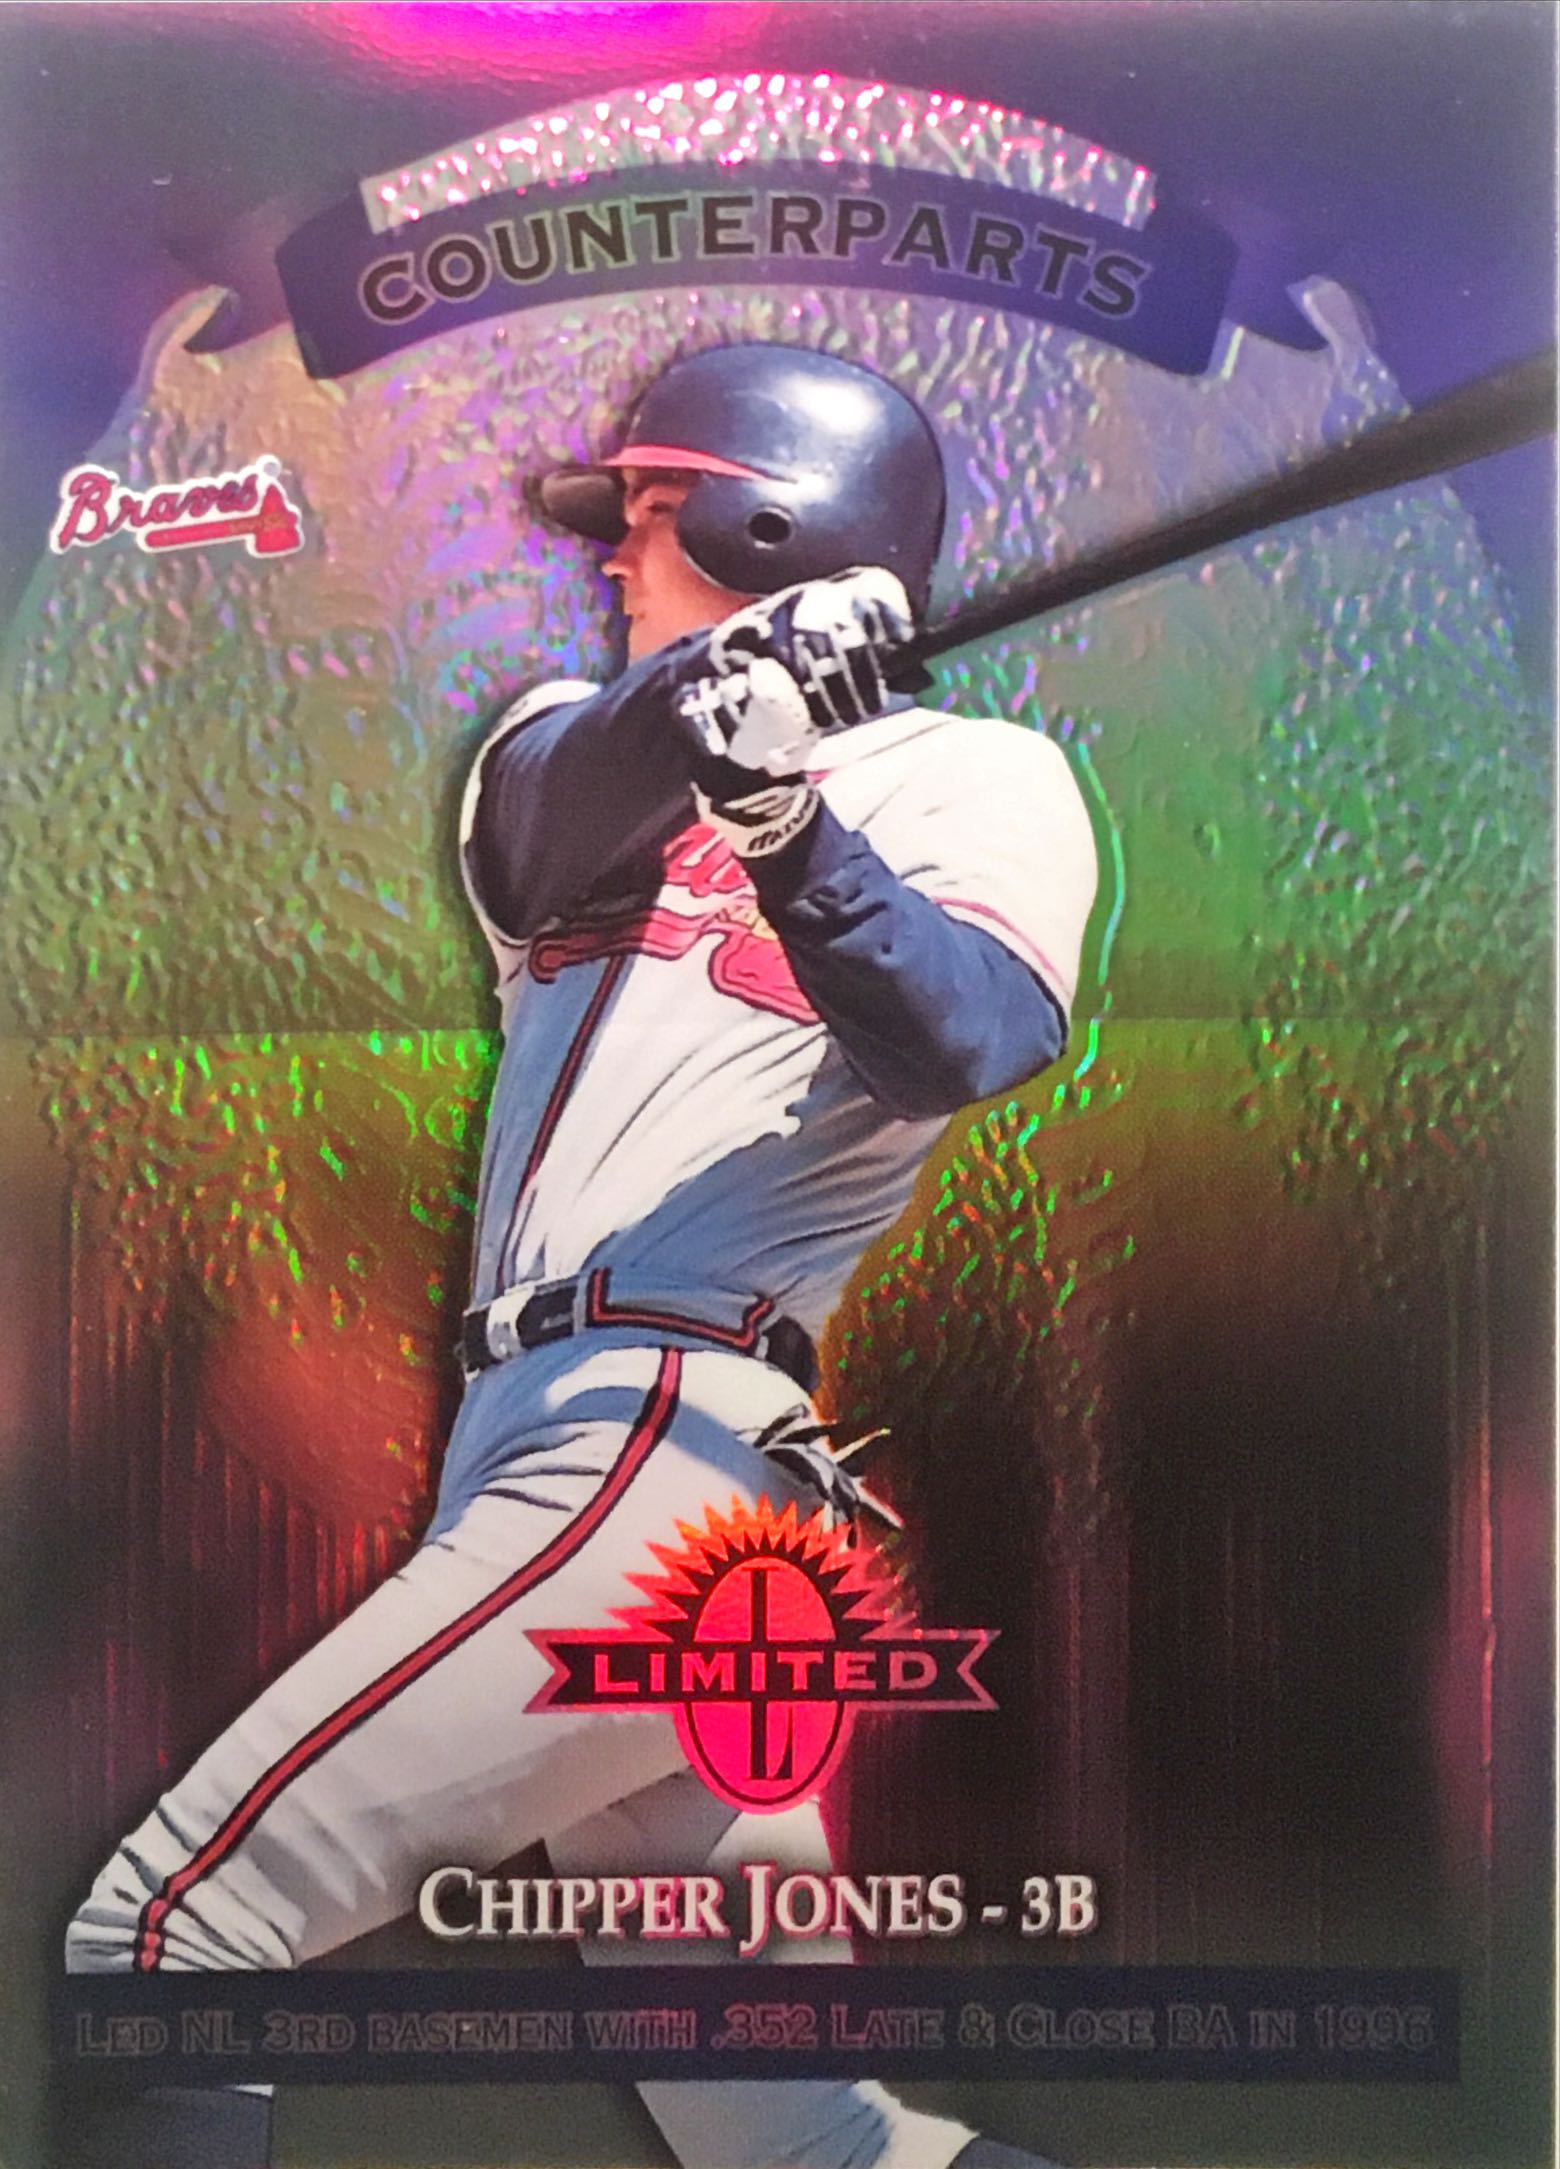 1997 Donruss Limited Exposure 23 front image